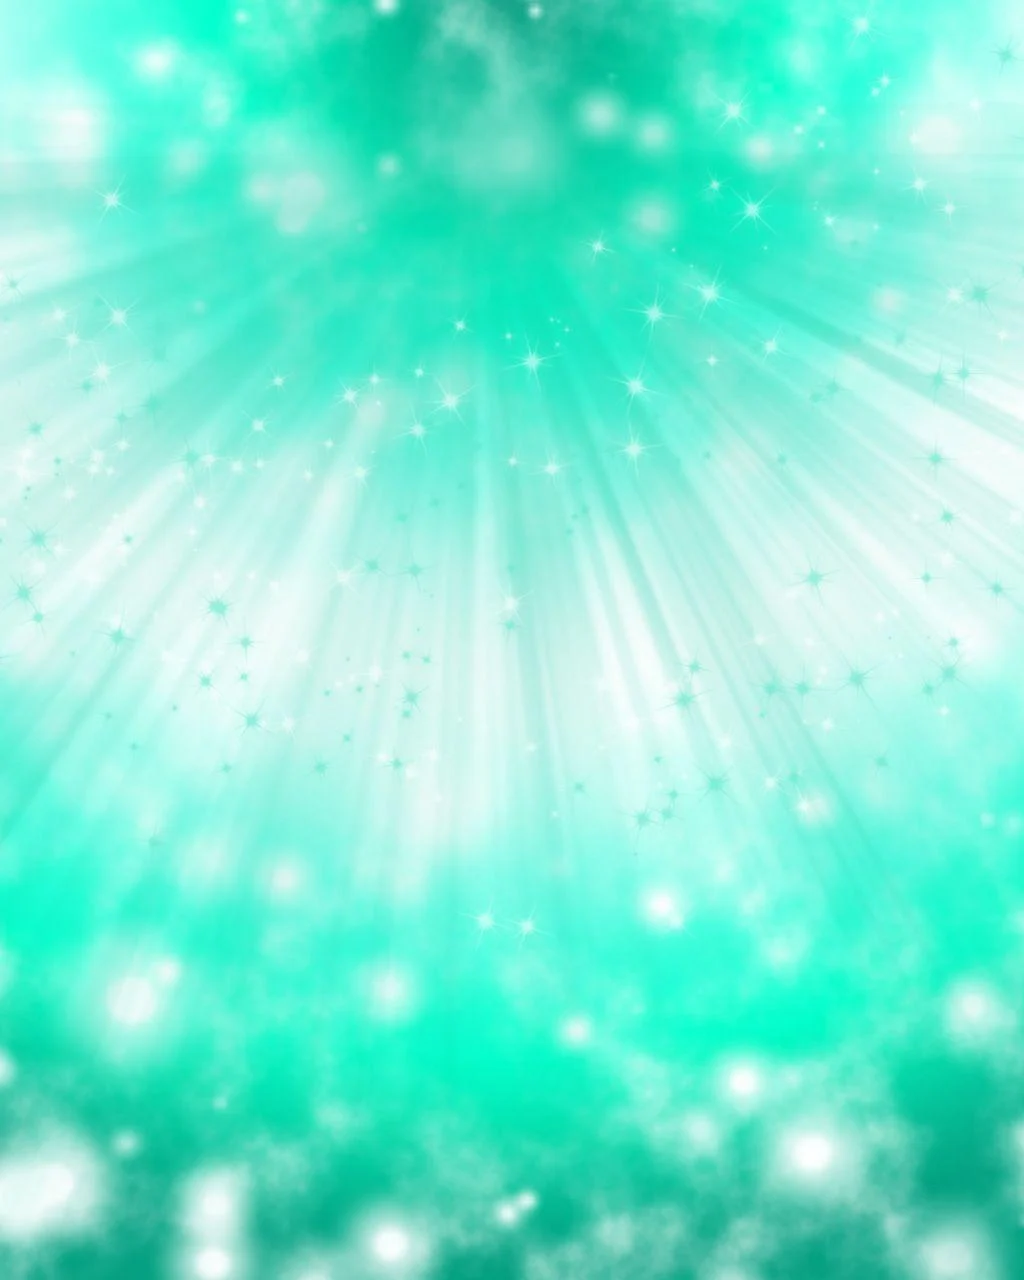 A blue and green abstract background with a burst of light - Mint green